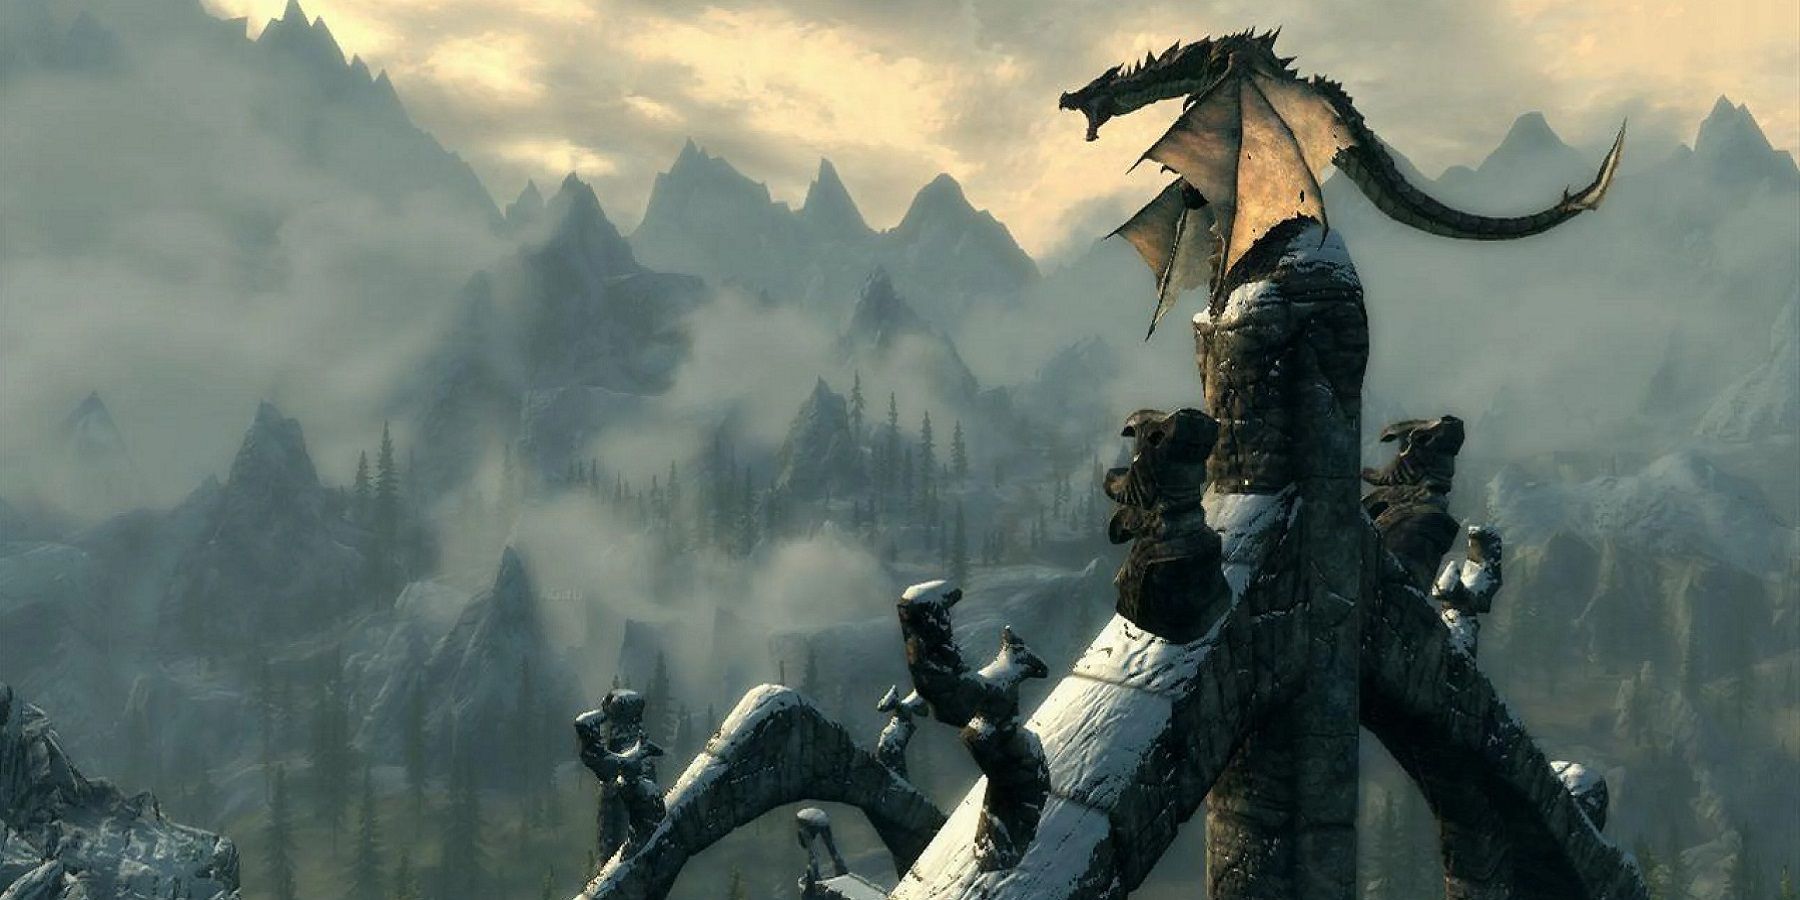 Skyrim Glitch Shows Revered Dragon Head Sticking Out of the Ground